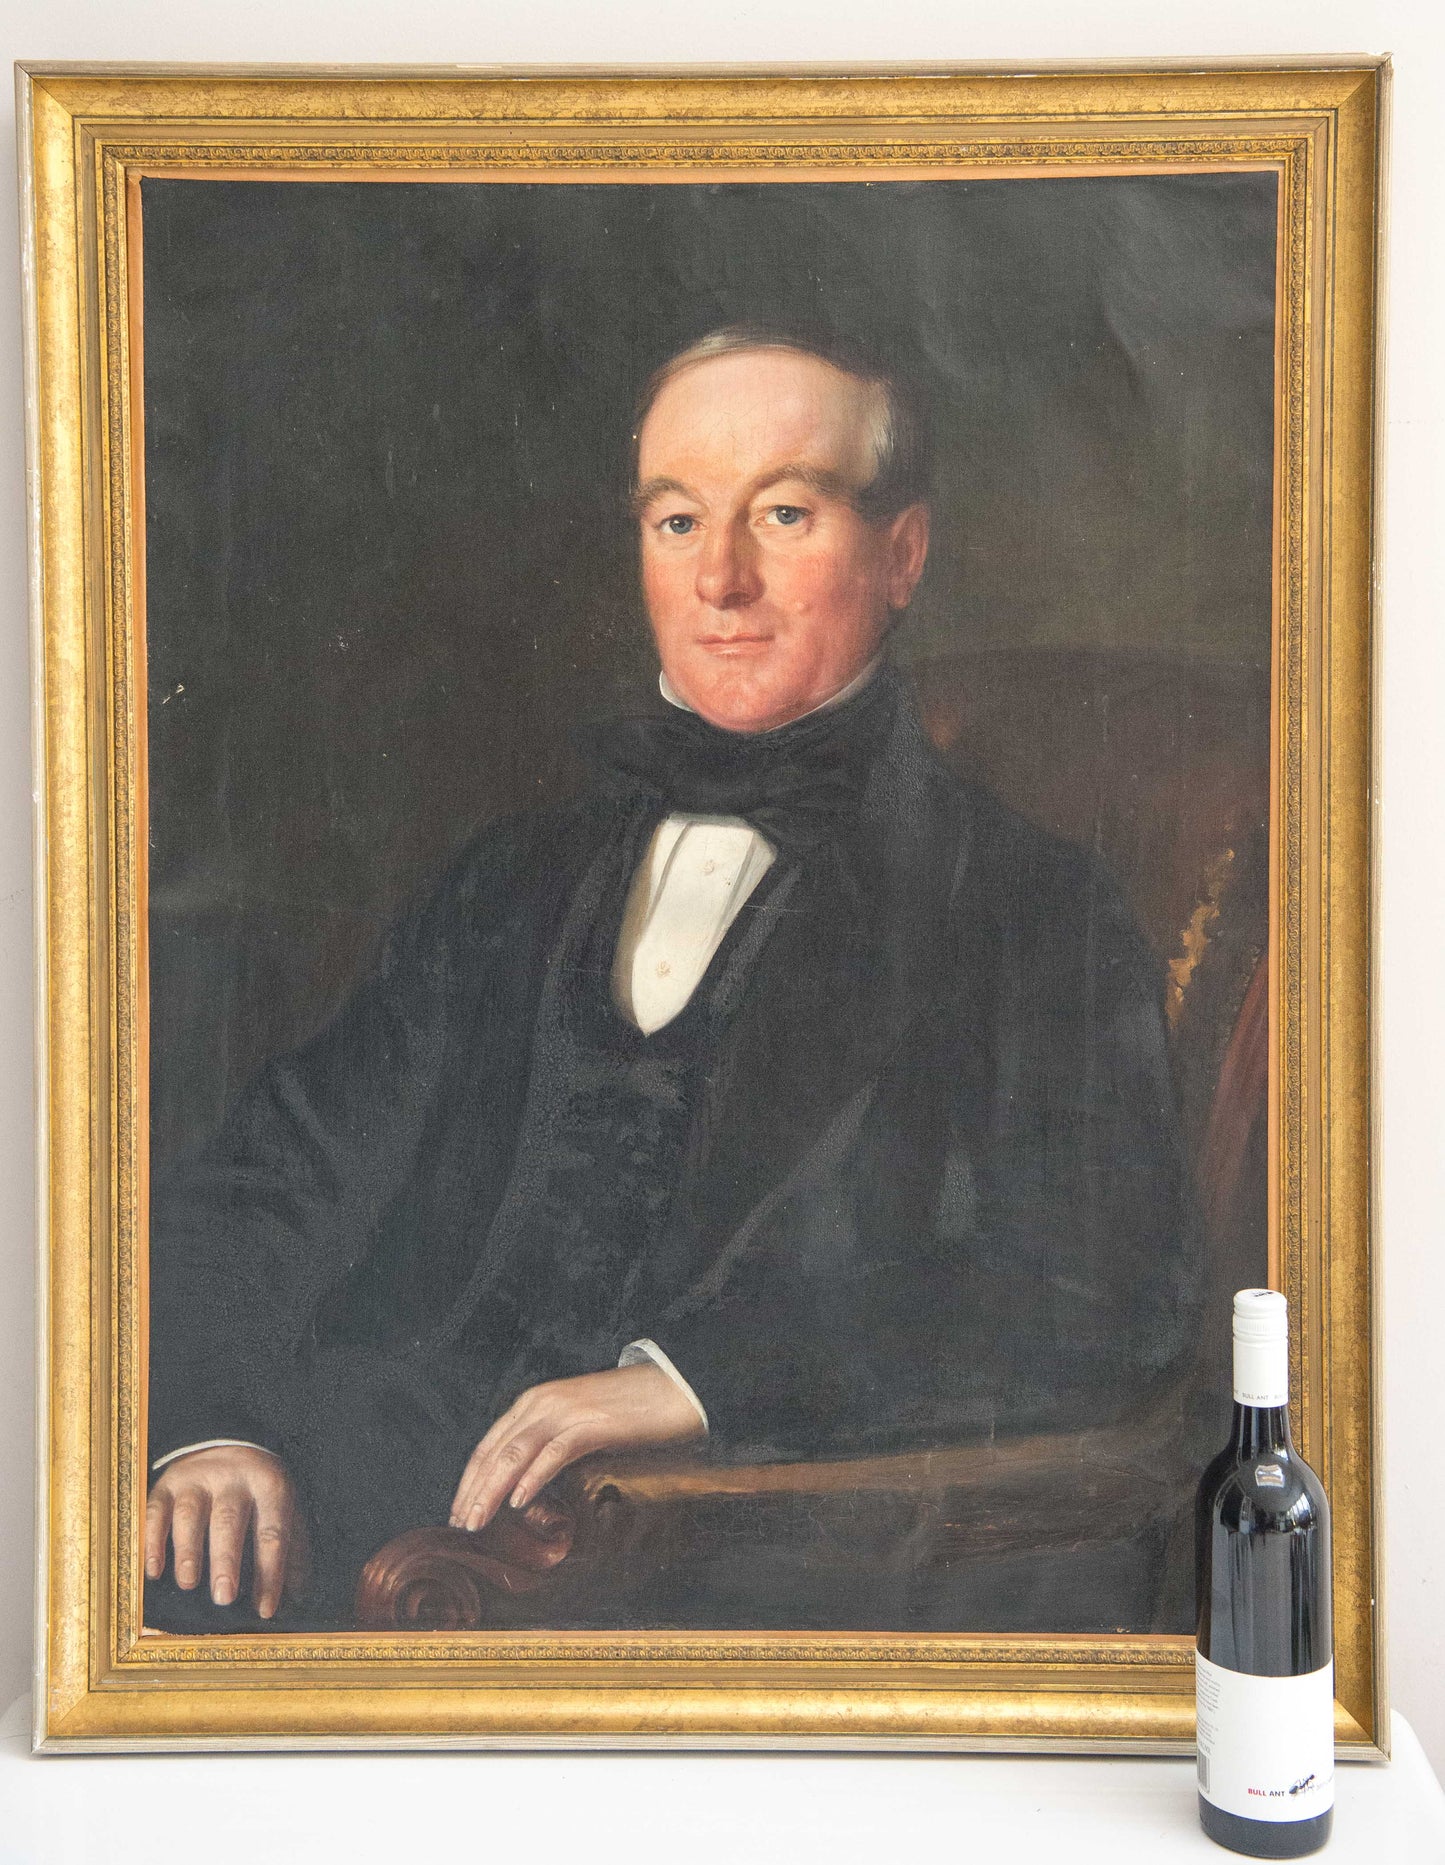 A large English School, circa 1830, oil on canvas portrait of a Gentleman.